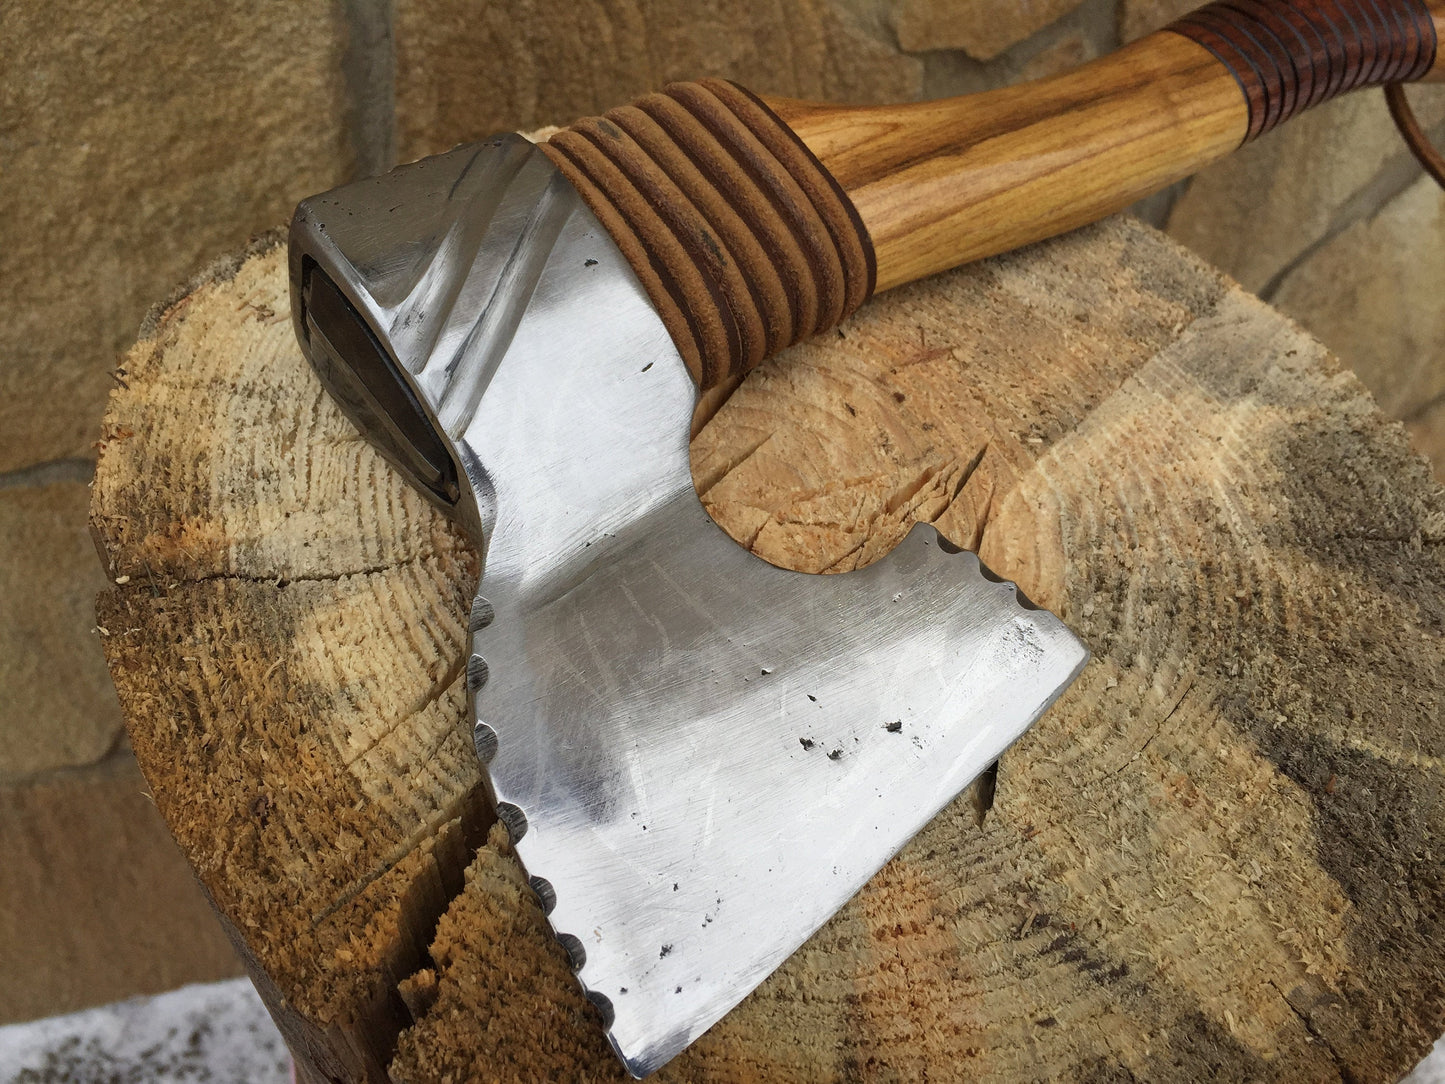 Sharp axe, viking axe, viking hatchet, cutting tools, camping axe, brother axe gift, grandpa axe gift, mothers day gift, survival products